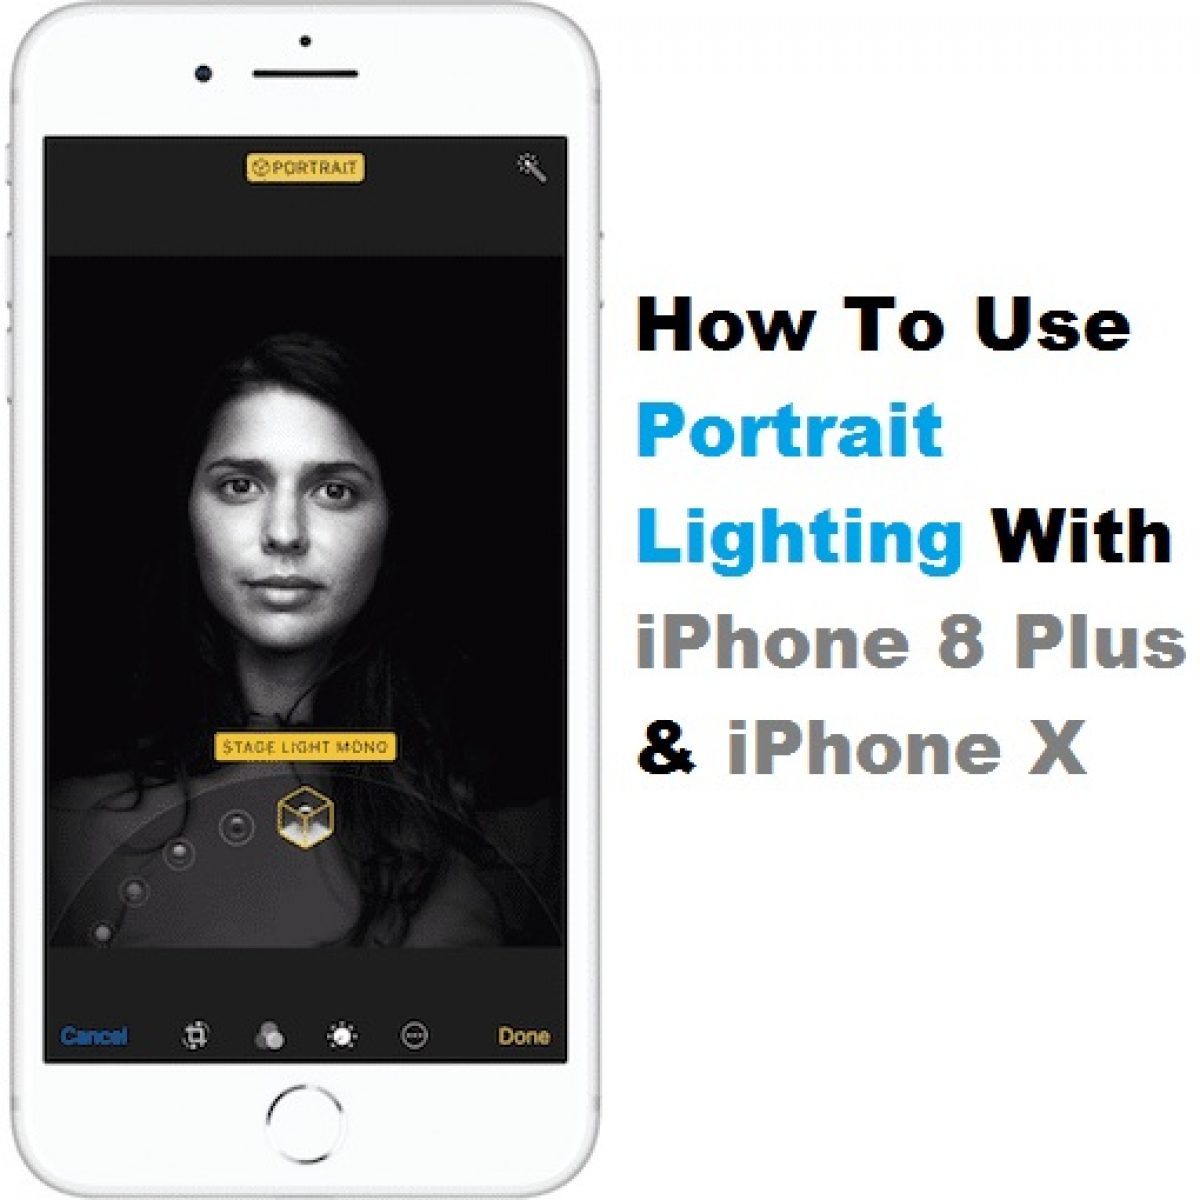 To Use Portrait Lighting On iPhone Plus iPhone X In 11